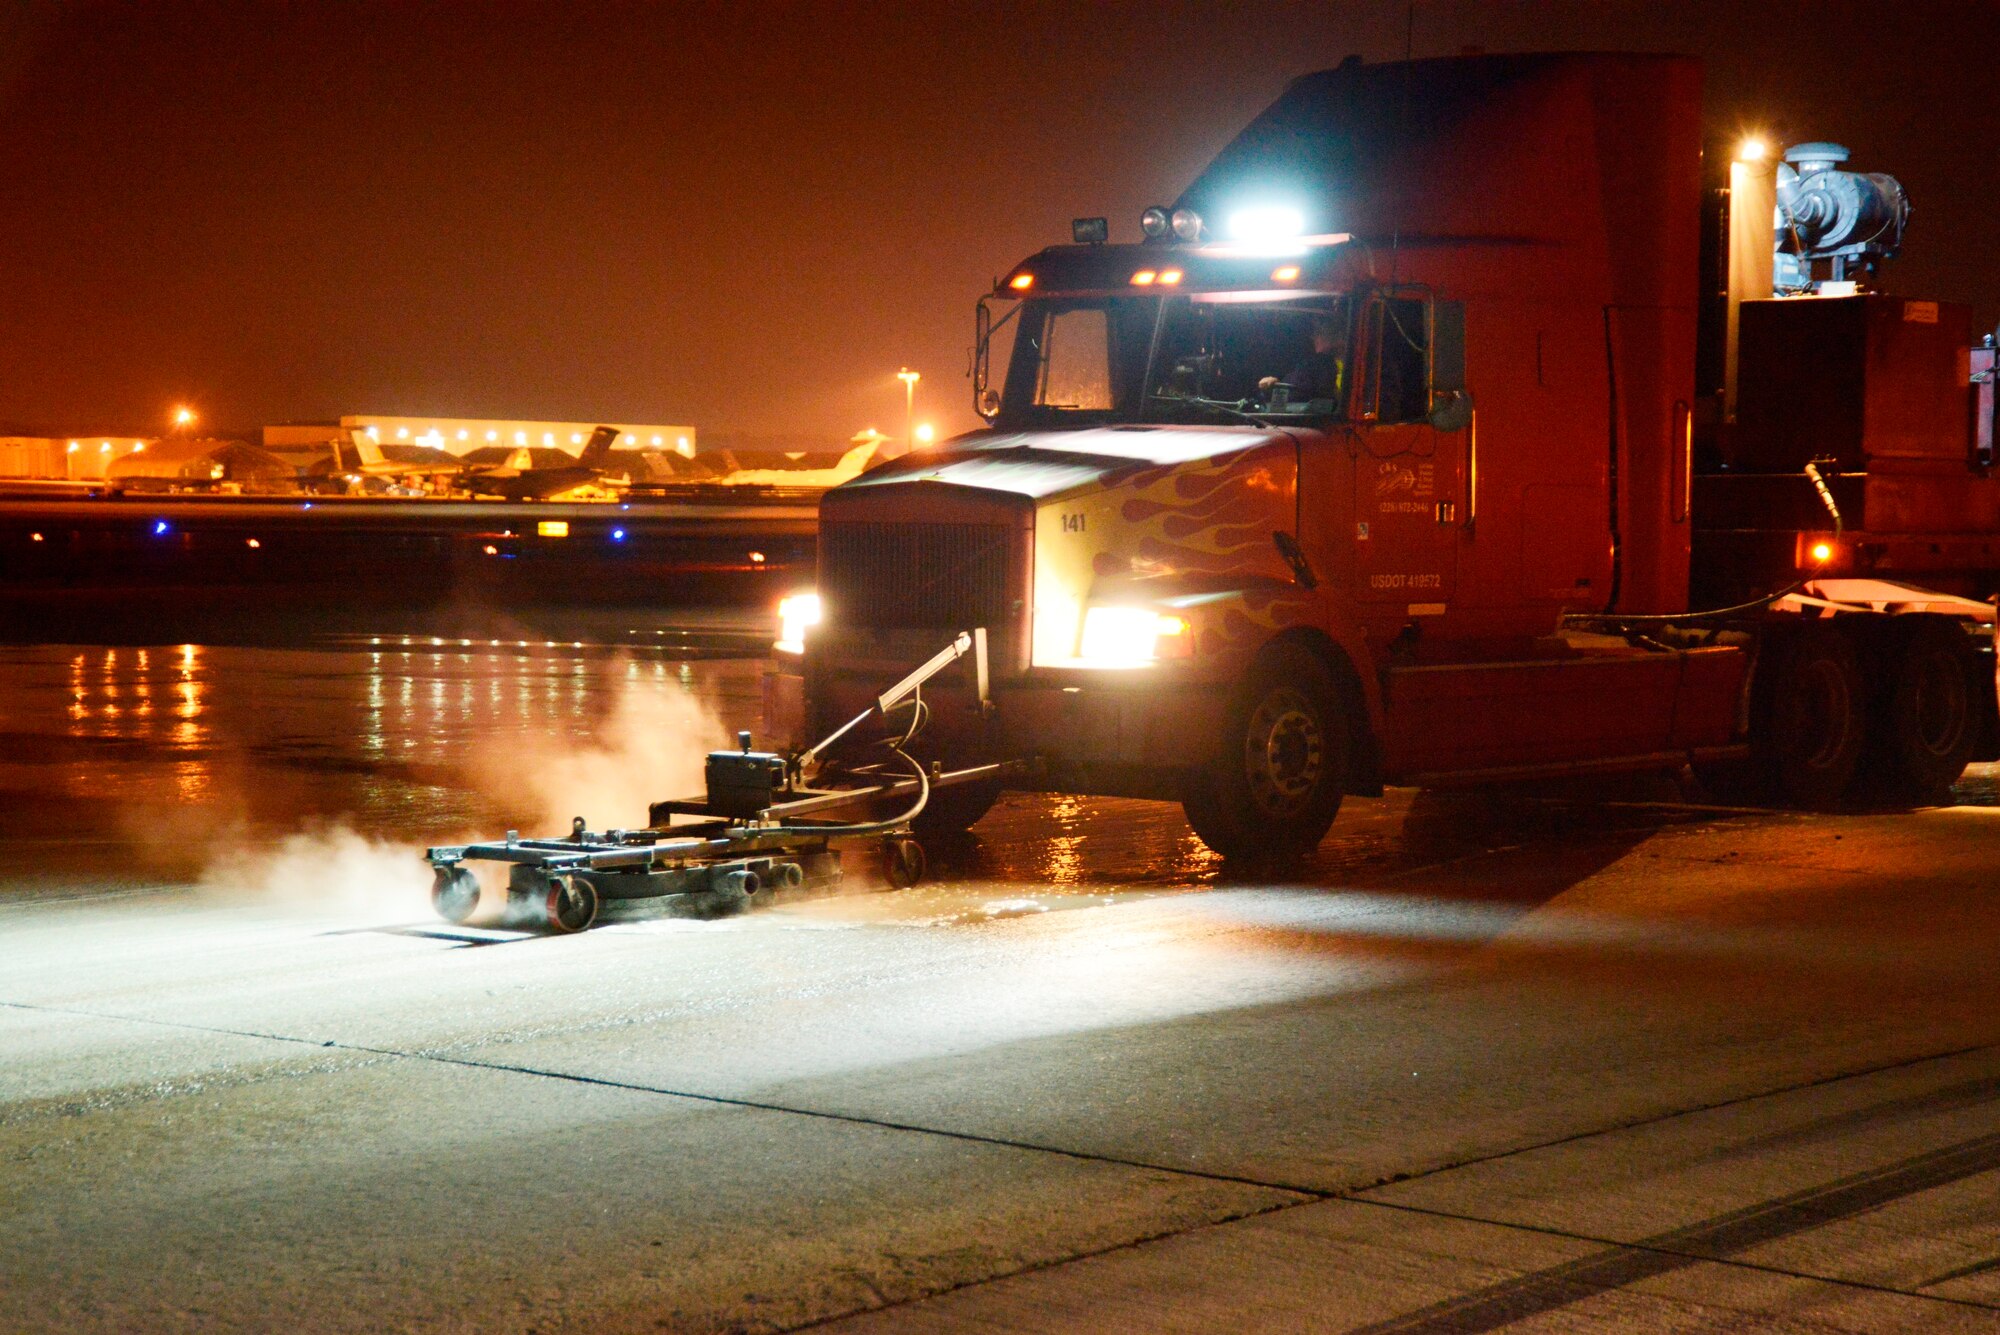 Scott Mansfield, a local contractor, navigates a custom-built 18 wheeler which removes aircraft tire rubber and paint lines from the Robins airfield using high-pressure water for paint at 1,500 PSI and light detergent. Tire rubber particles are then picked up by a sweeper vacuum truck. (U.S. Air Force photo by Ed Aspera)